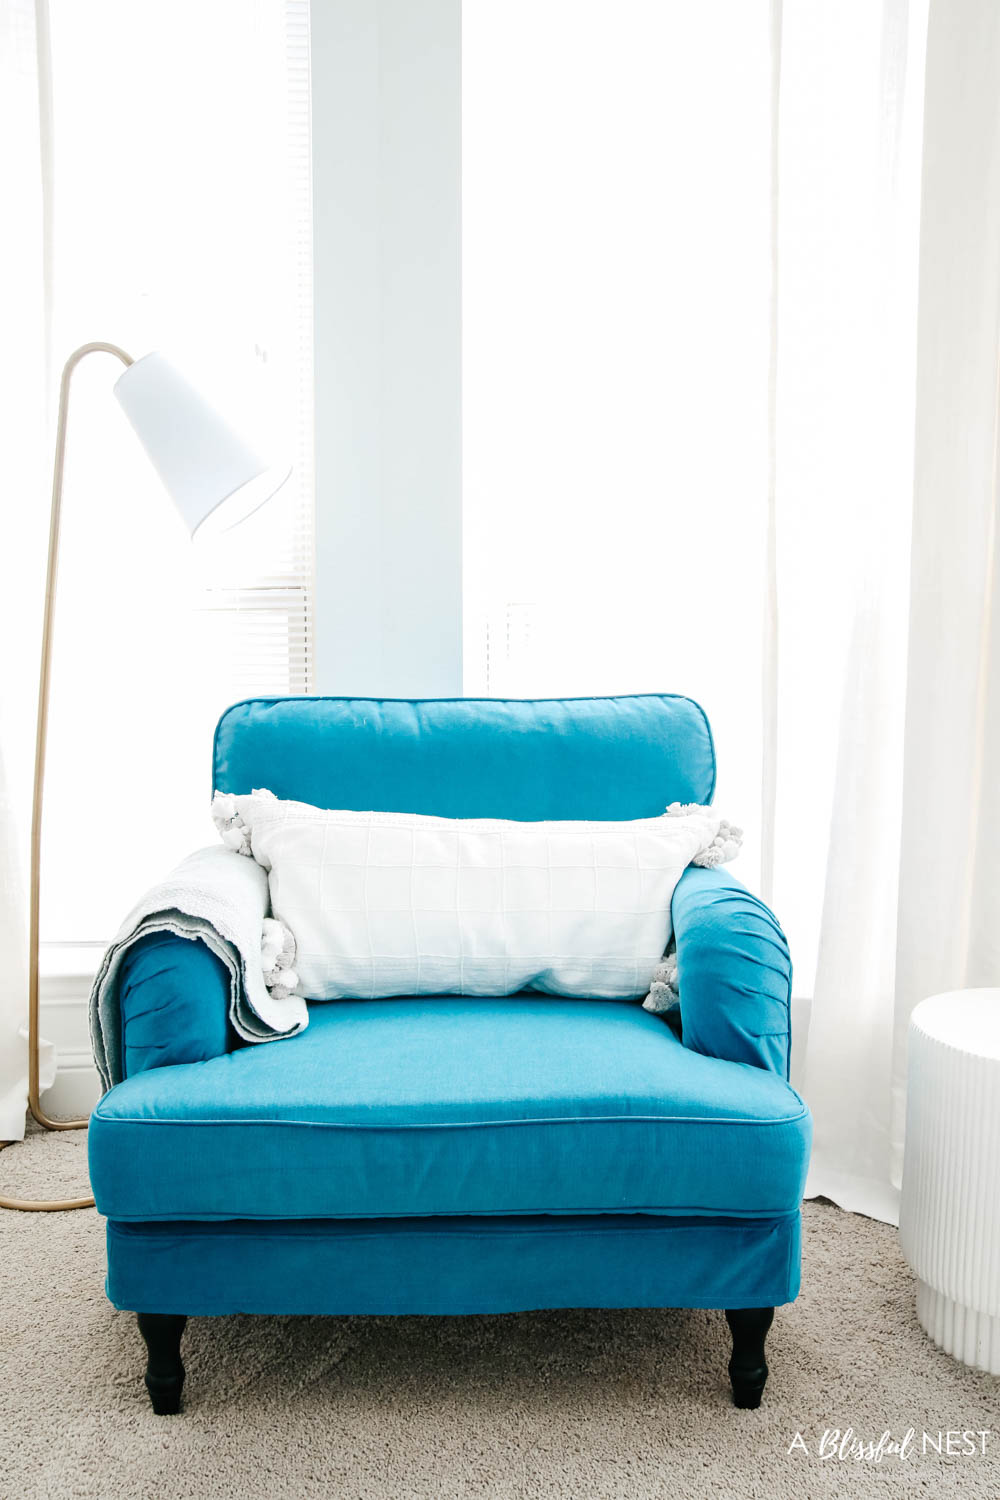 Cozy blue chair with throw blanket and gold floor lamp next to it.